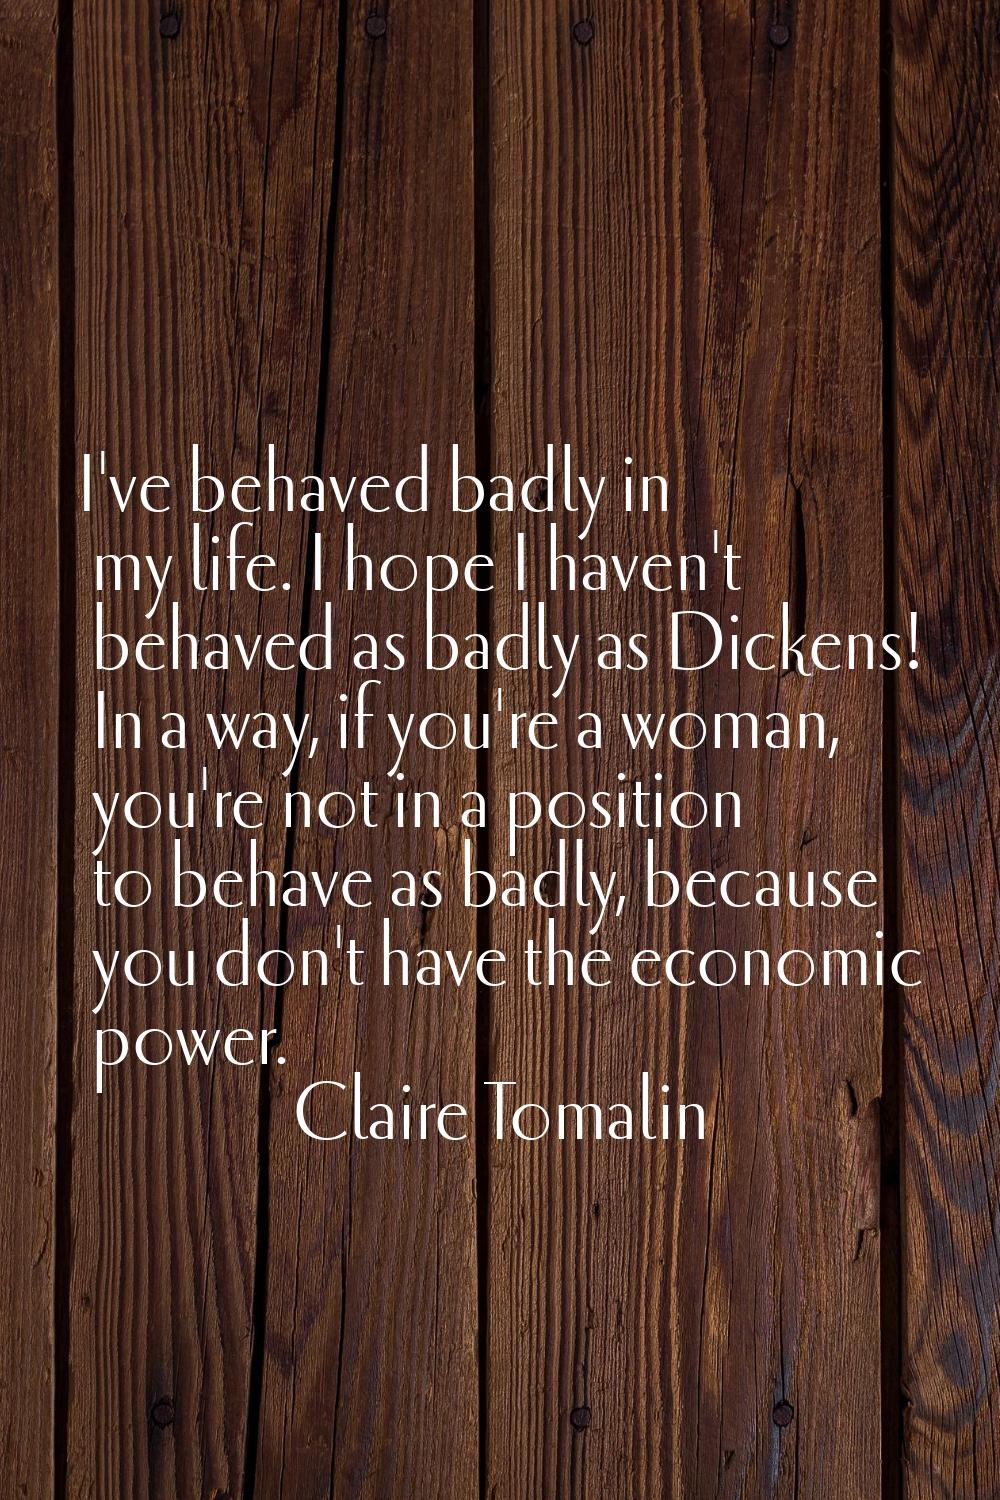 I've behaved badly in my life. I hope I haven't behaved as badly as Dickens! In a way, if you're a 